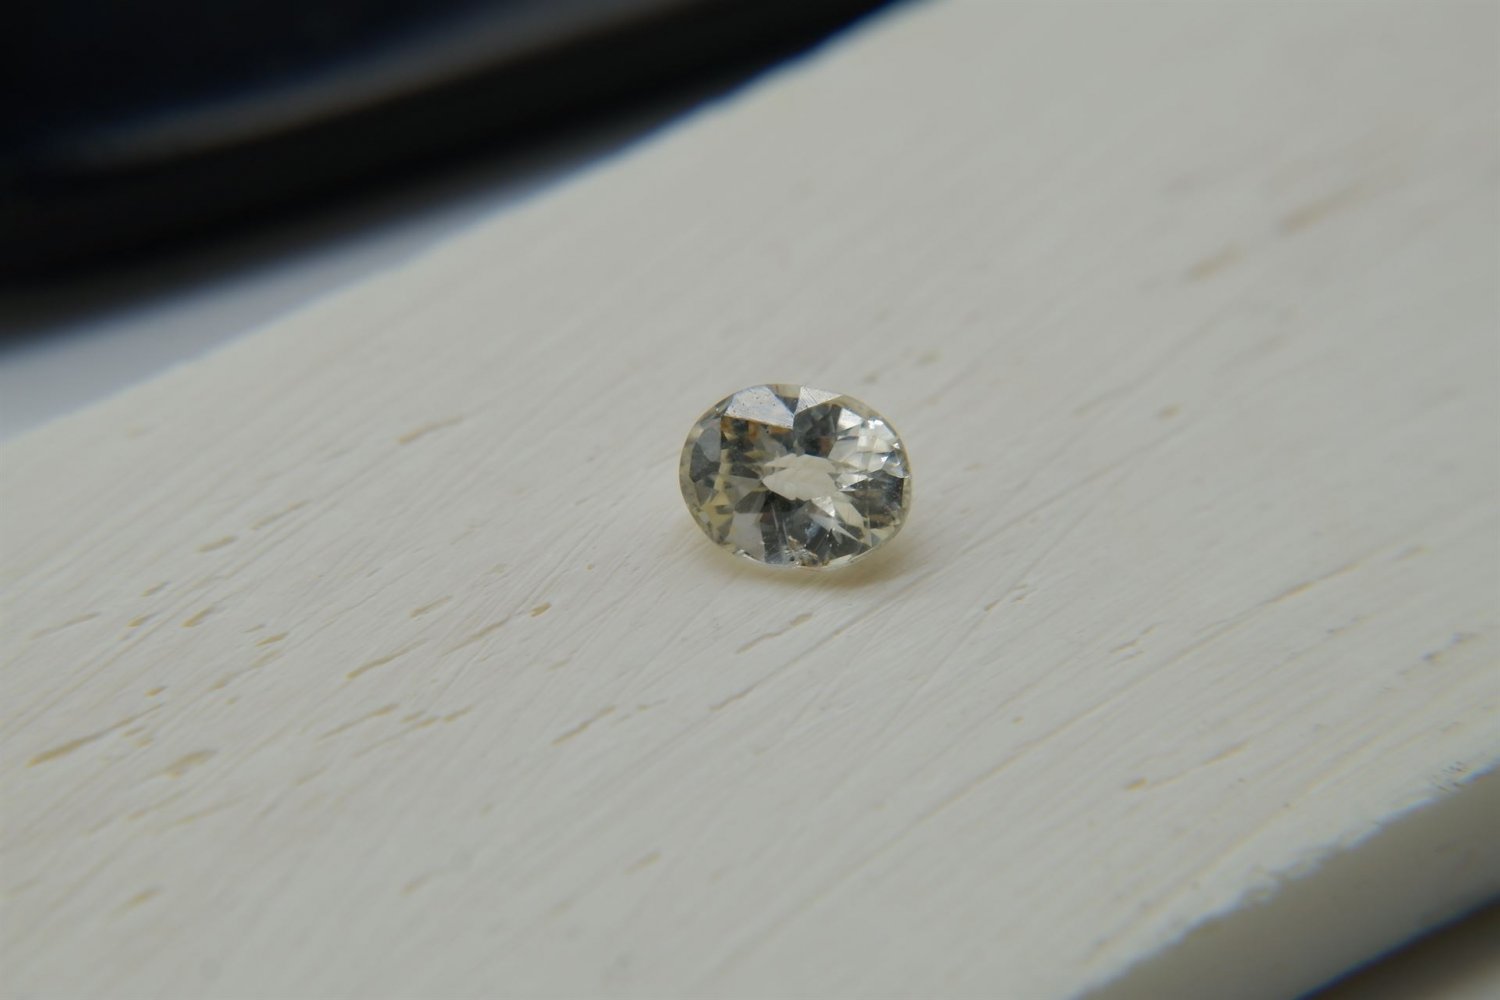 1.05 ct  Pastel Yellow Sapphire, handcrafted design cut premium handcrafted oval cut with lustrous f